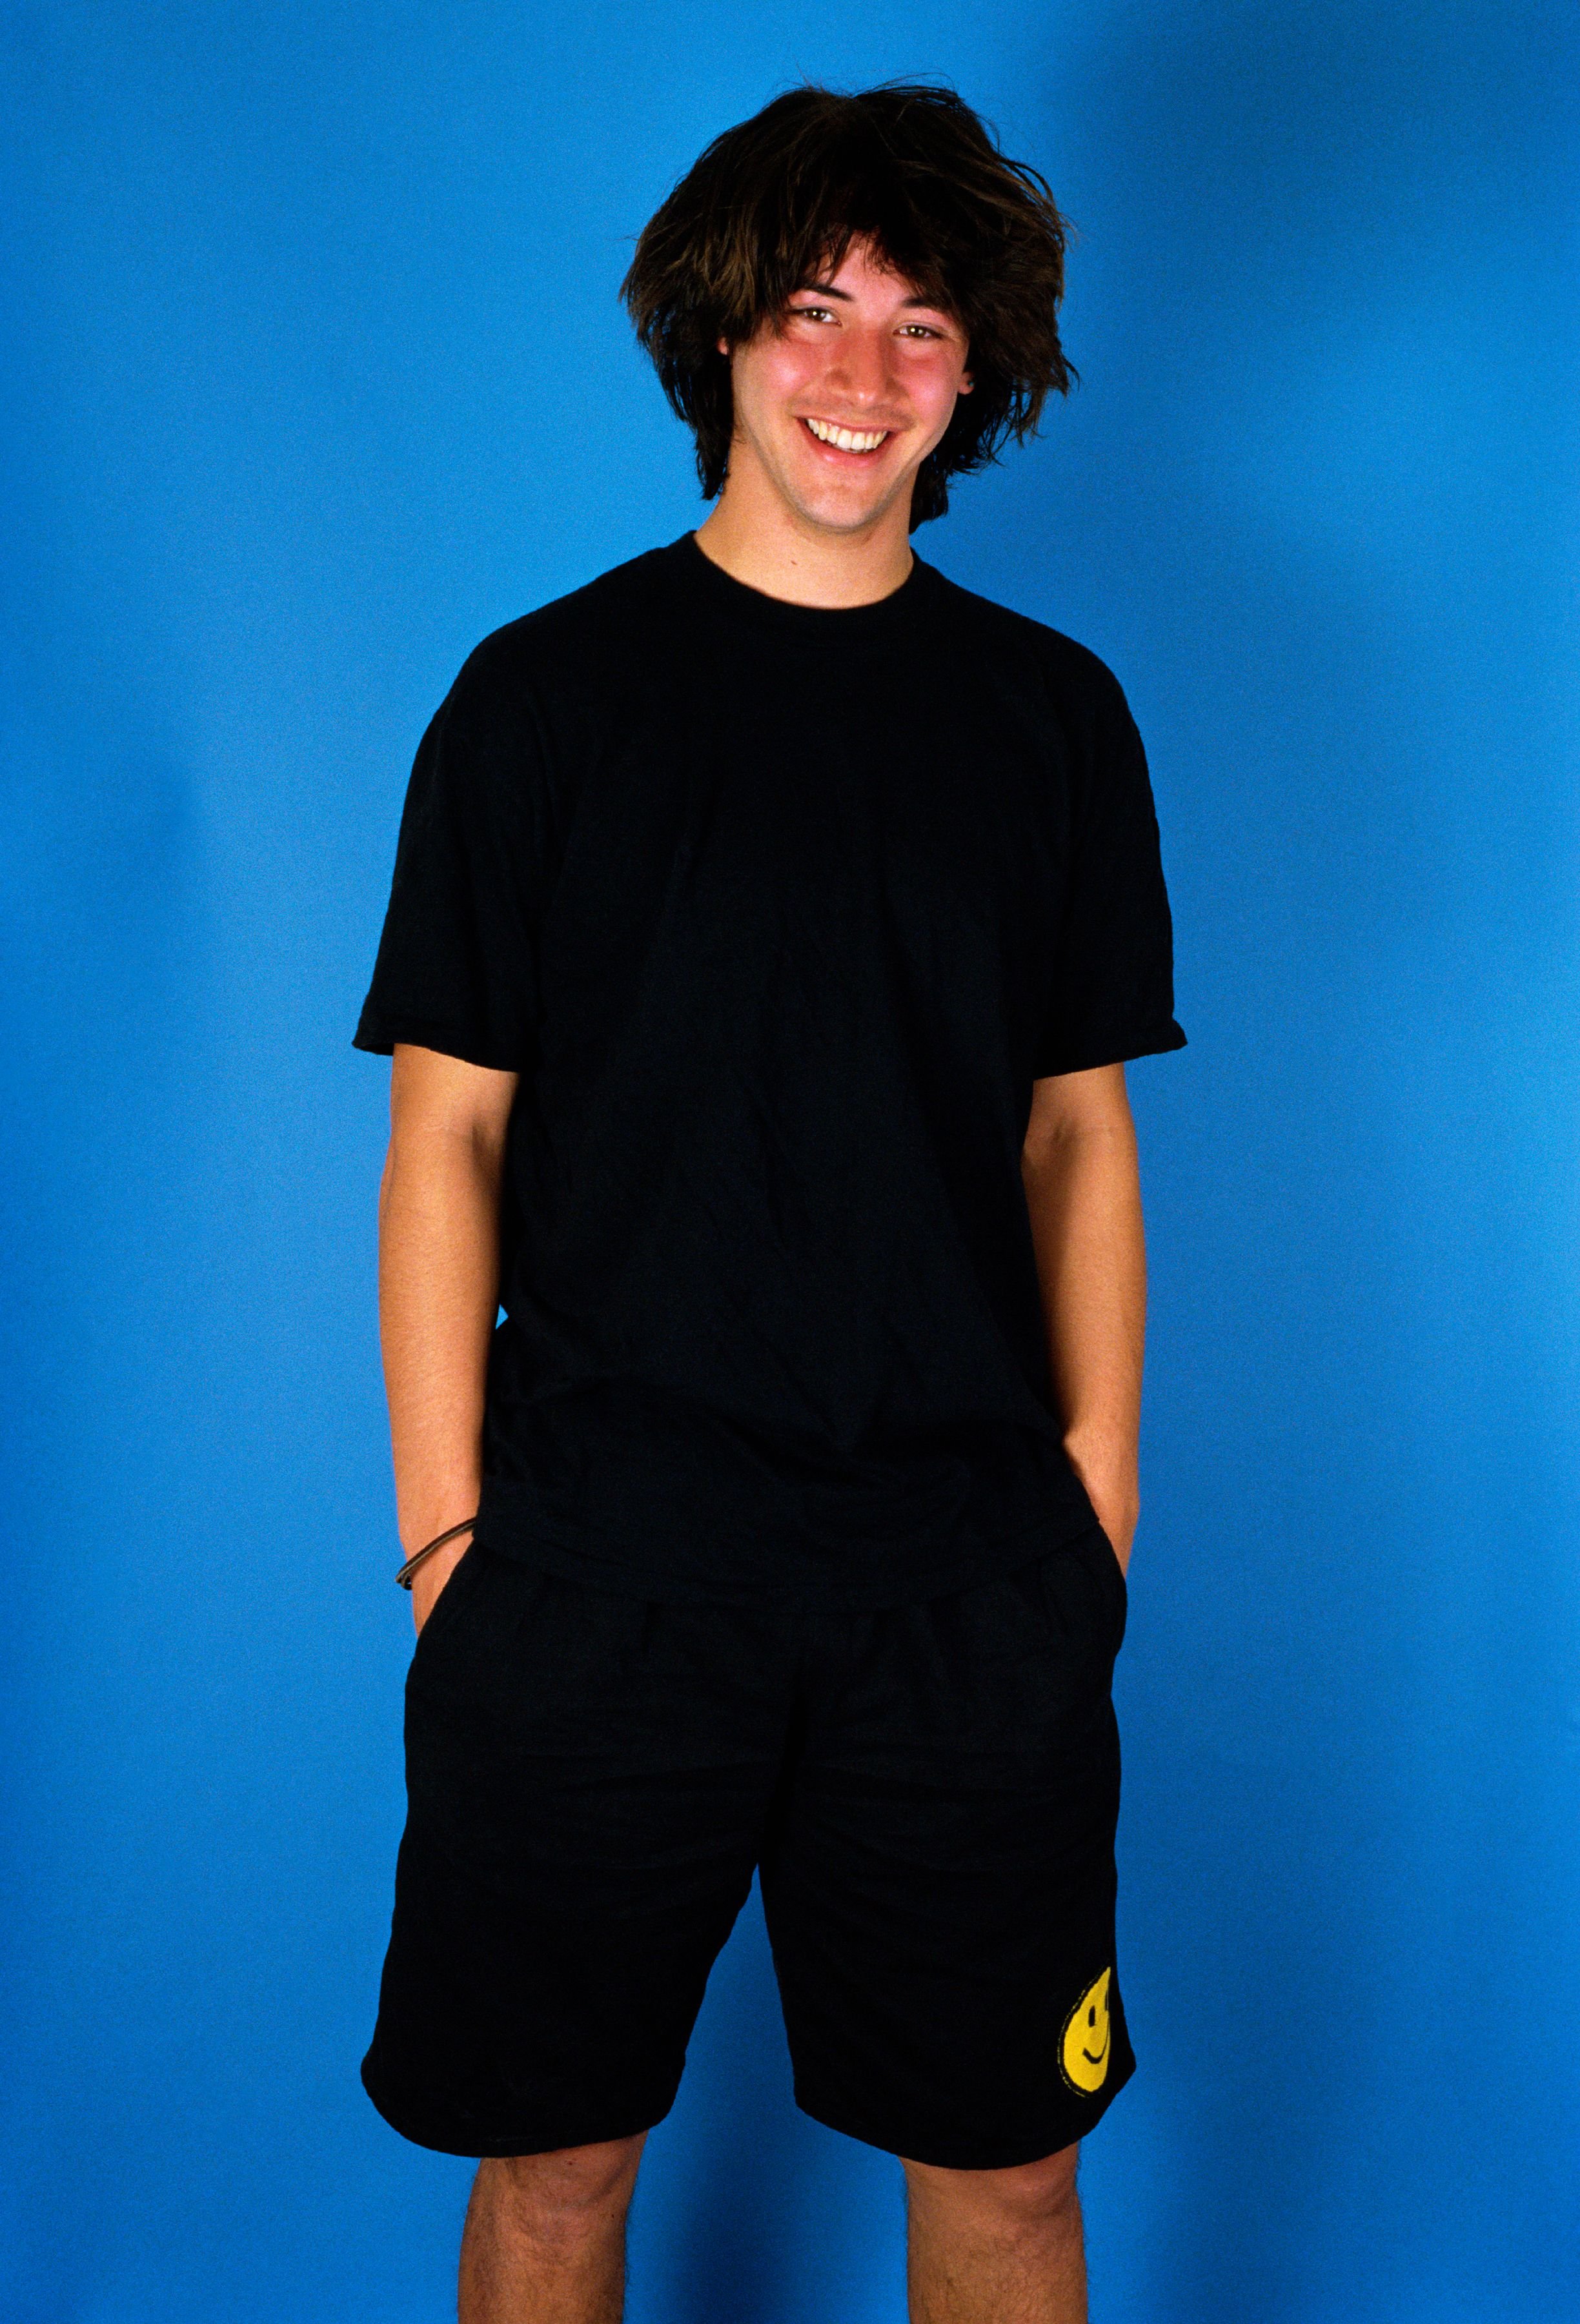 Keanu Reeves poses during a 1987 photo session in West Hollywood, California promoting "Bill & Ted's Excellent Adventure" | Source: Getty Images